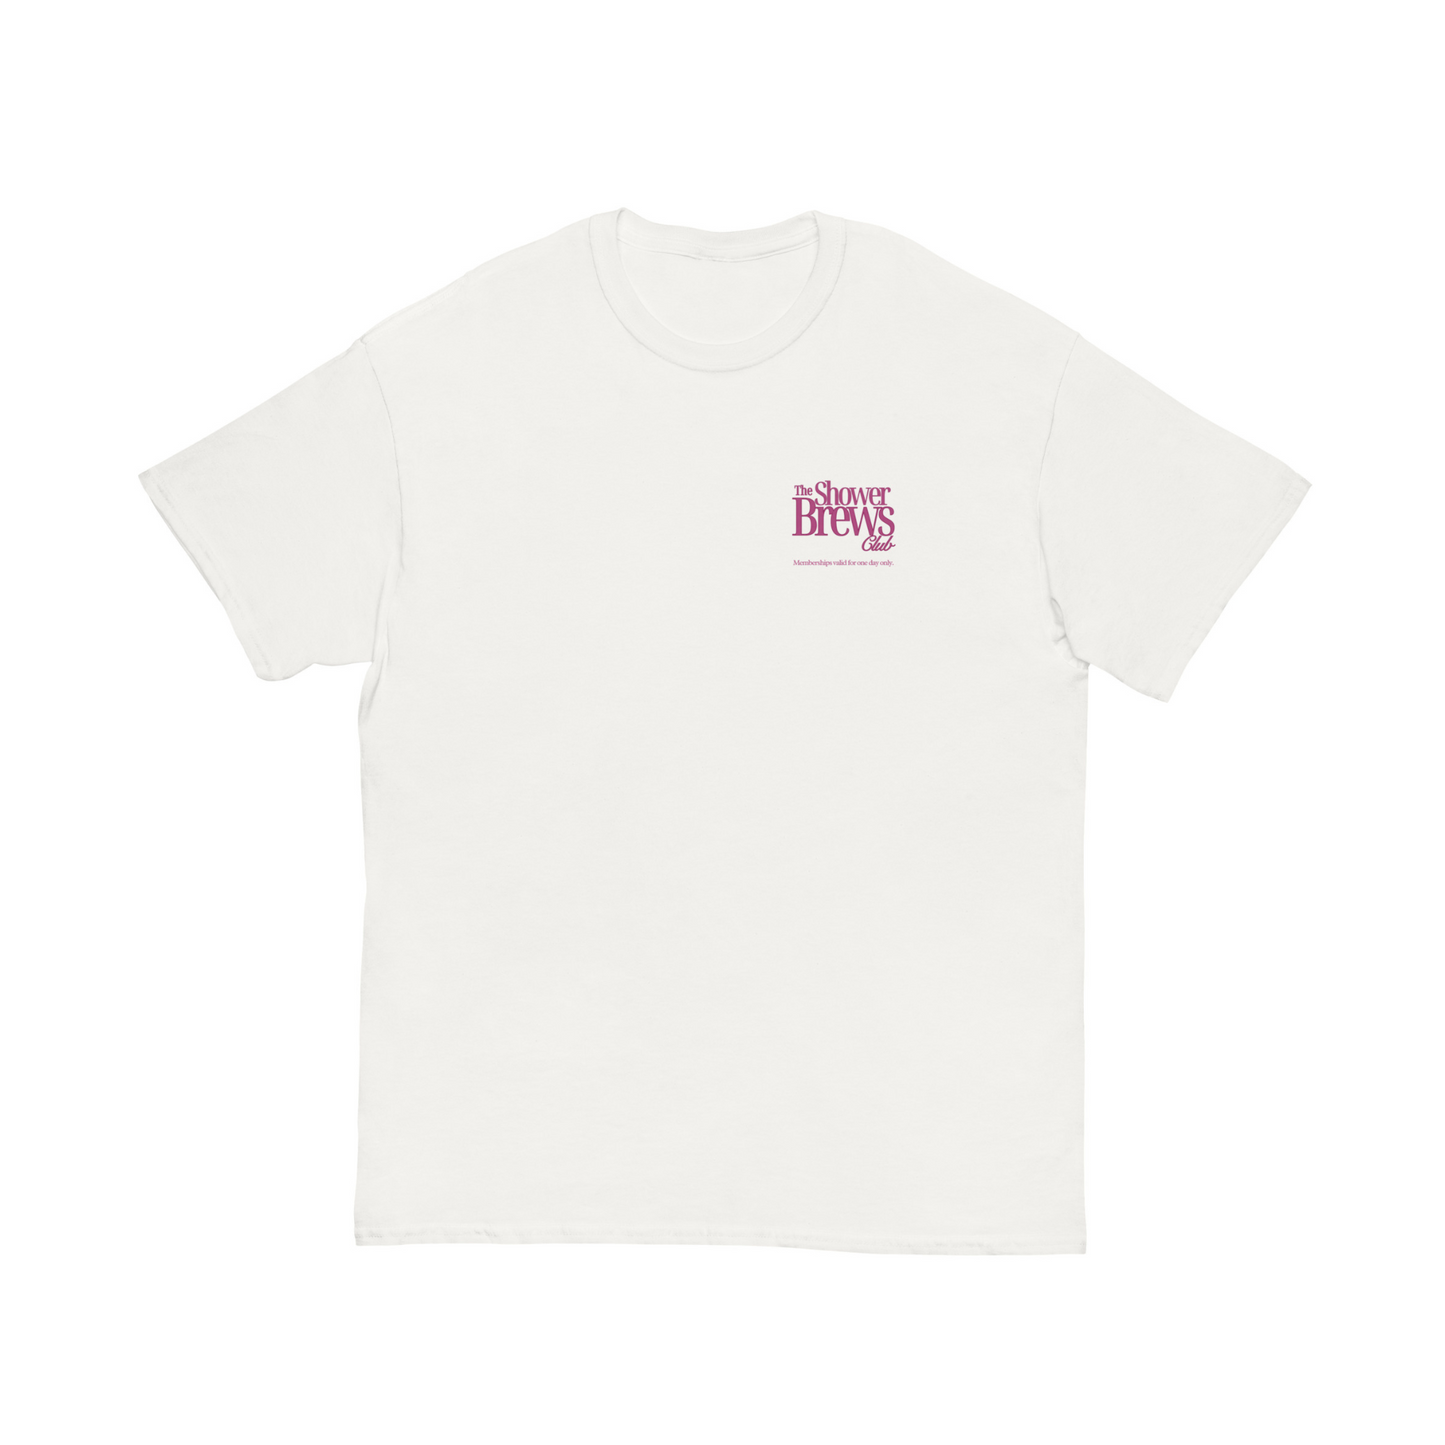 'The Shower Brews Club' T-Shirt in White & Maroon